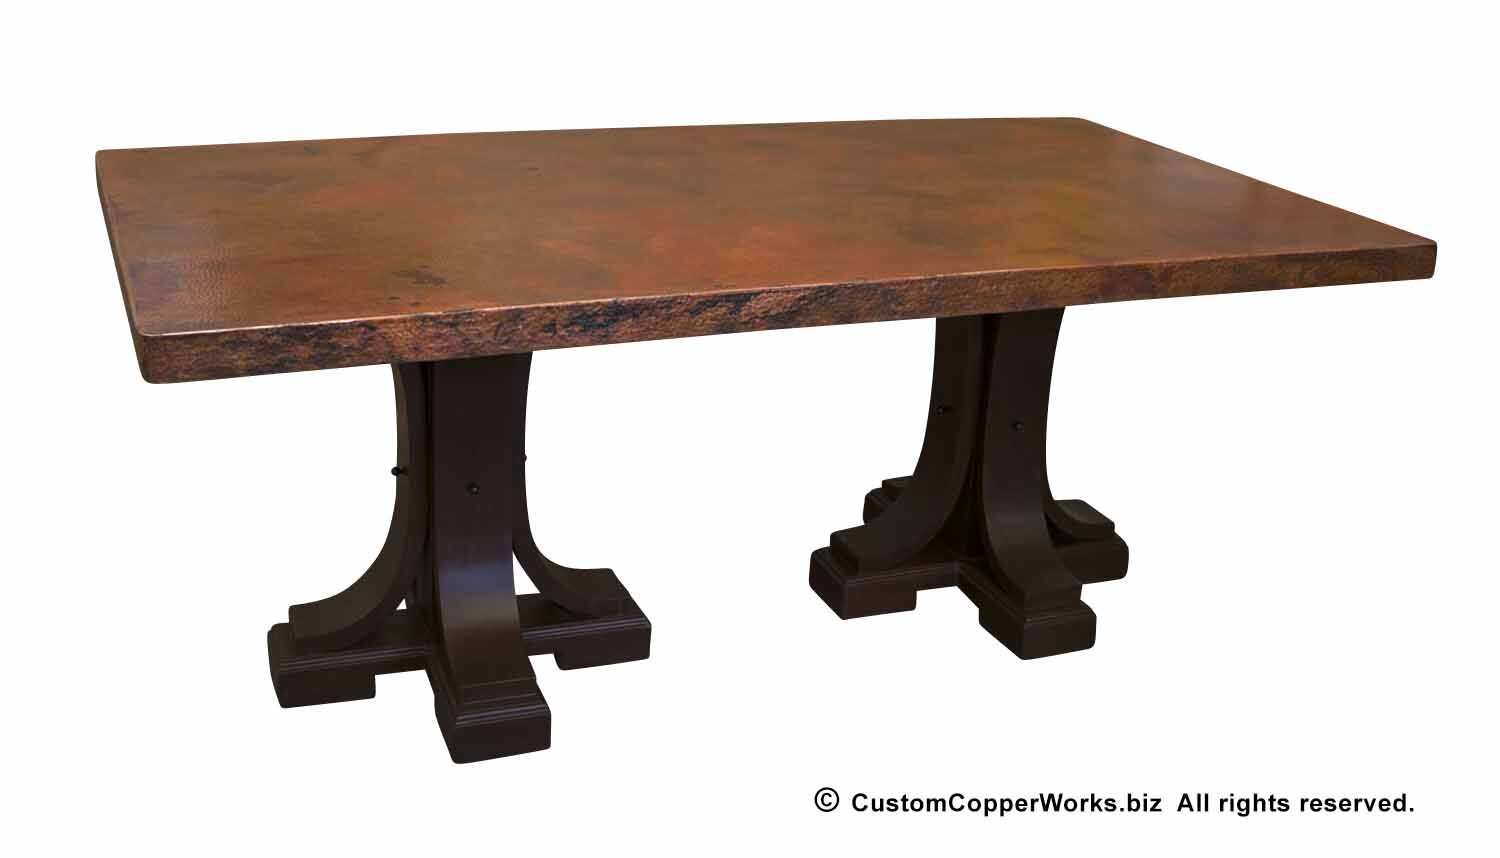 Hammered Copper Dining Table Top Mounted on a Trestle Style